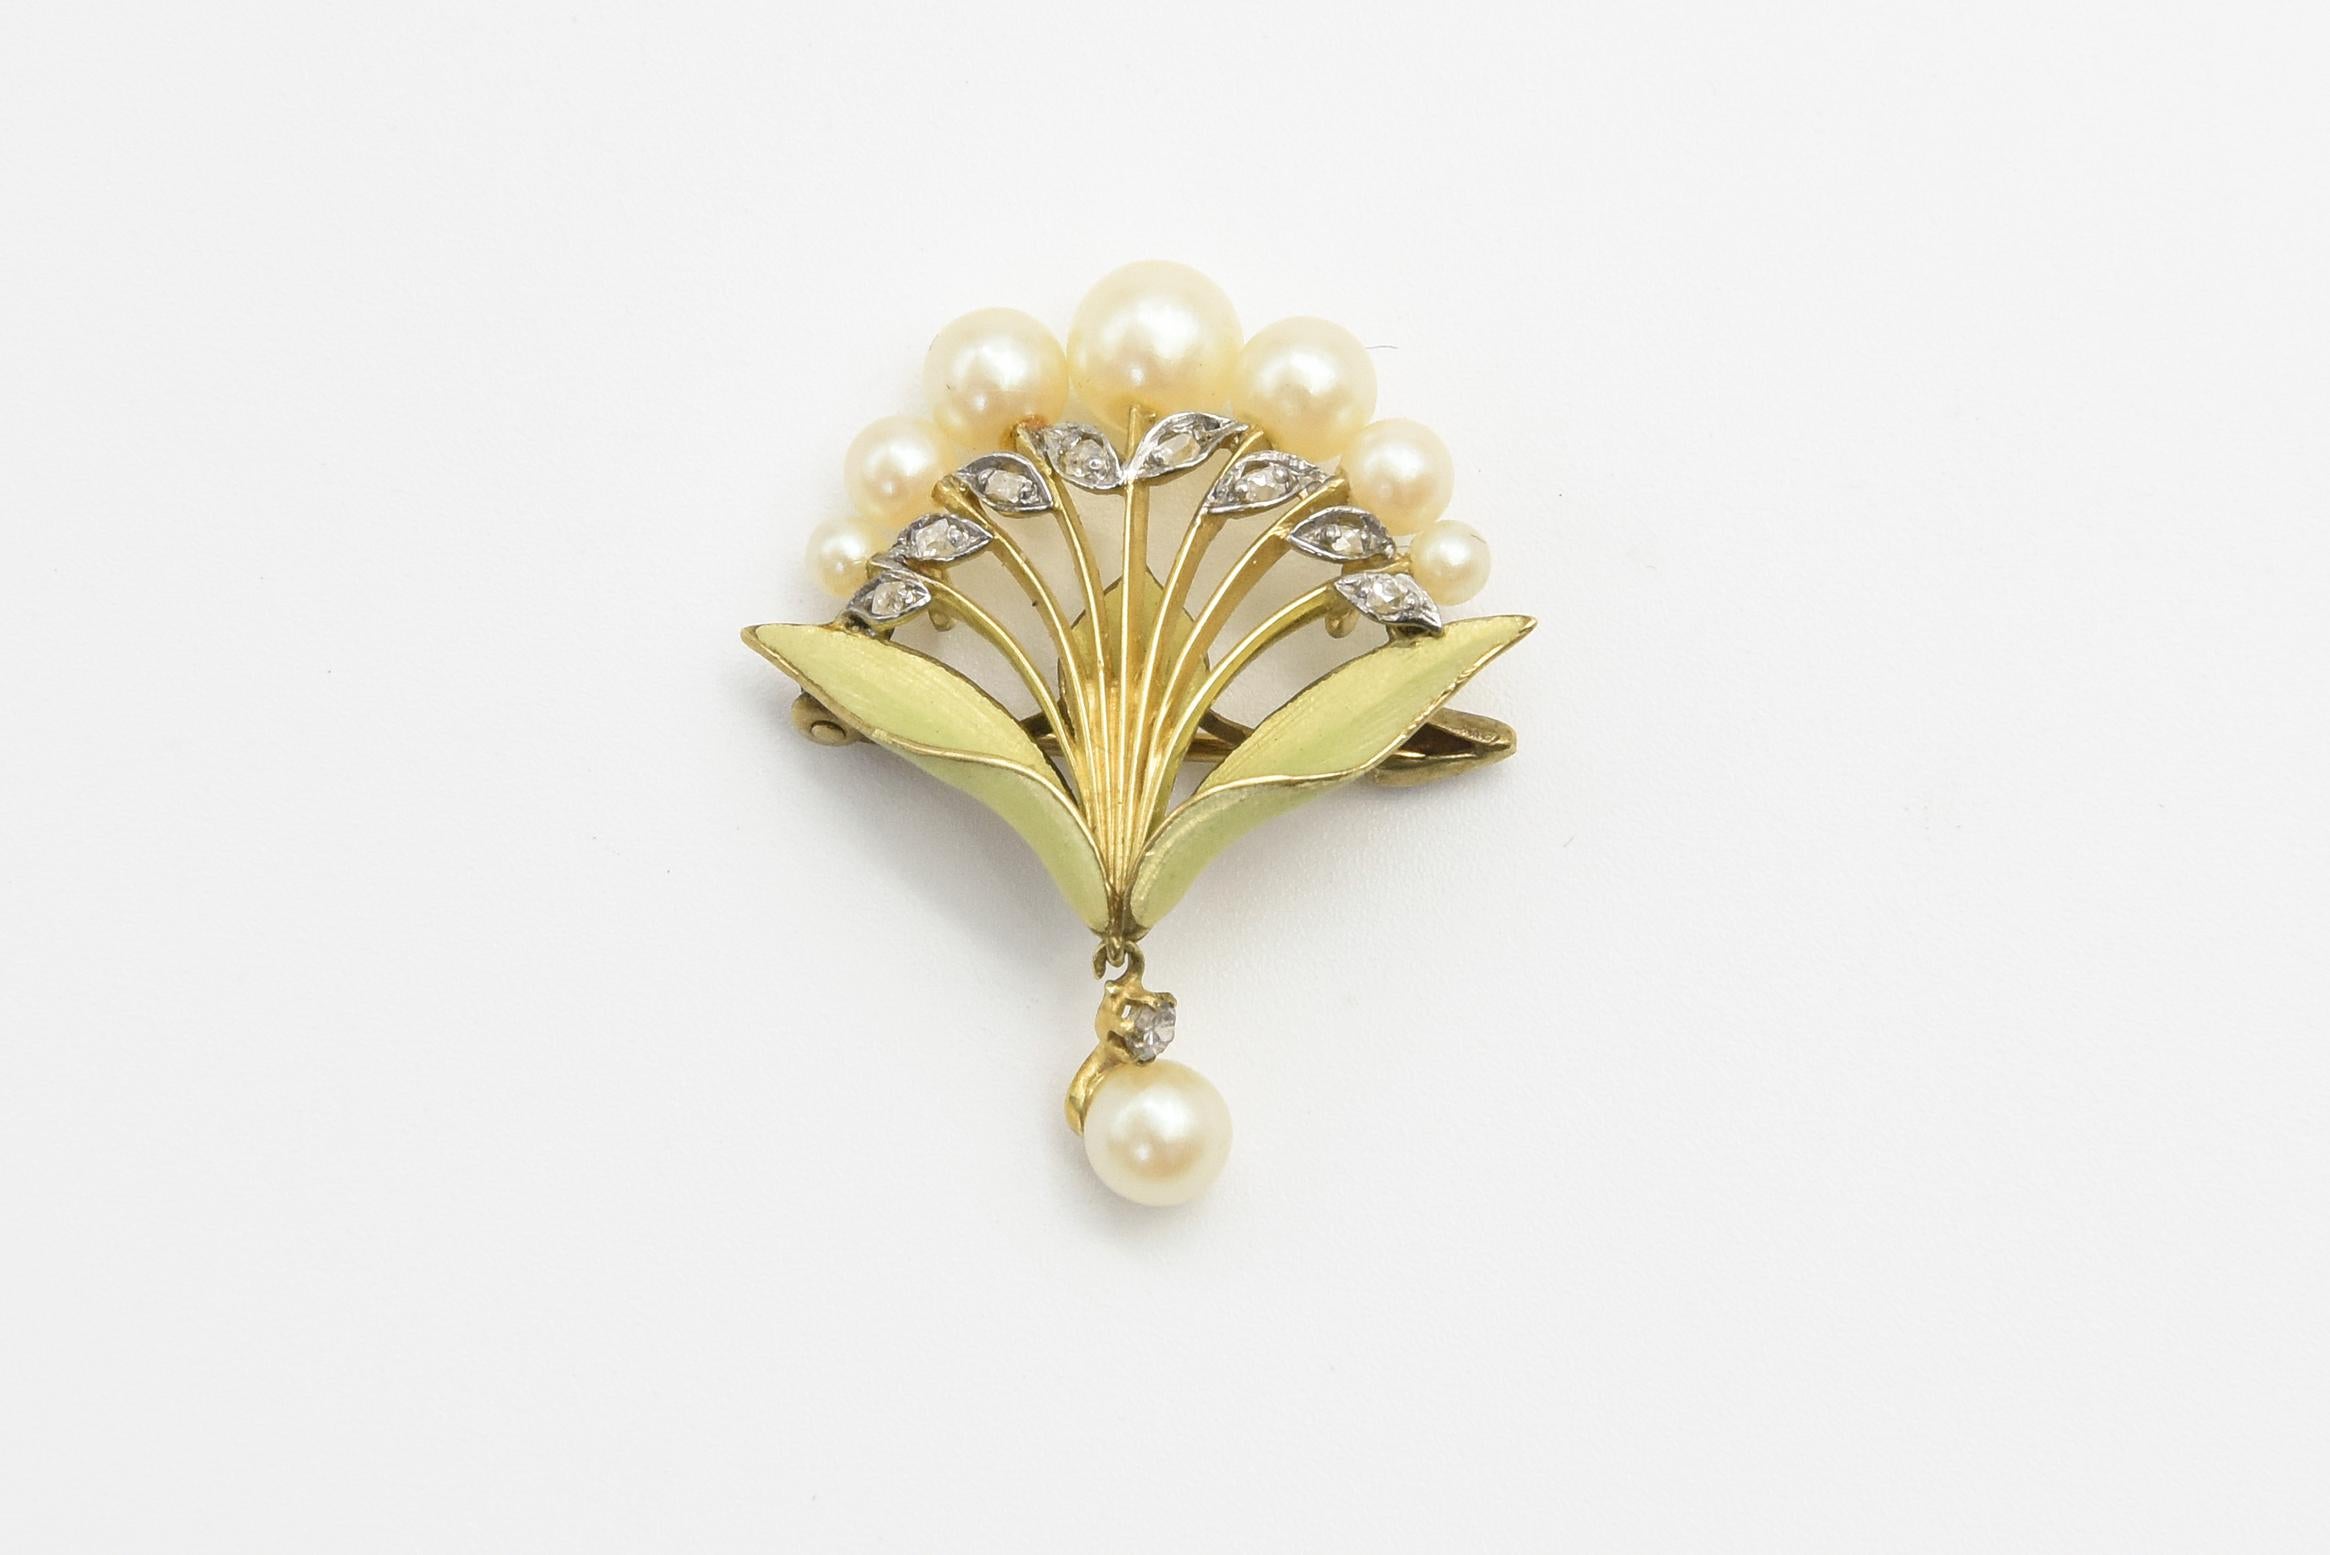 Stunning art nouveau enamel floral lily style spray brooch featuring seven graduating pearls on top of diamond and 18k yellow gold stems.  The brooch has two green enamel leaves that terminate with a diamond and pearl dangle.    The back has two